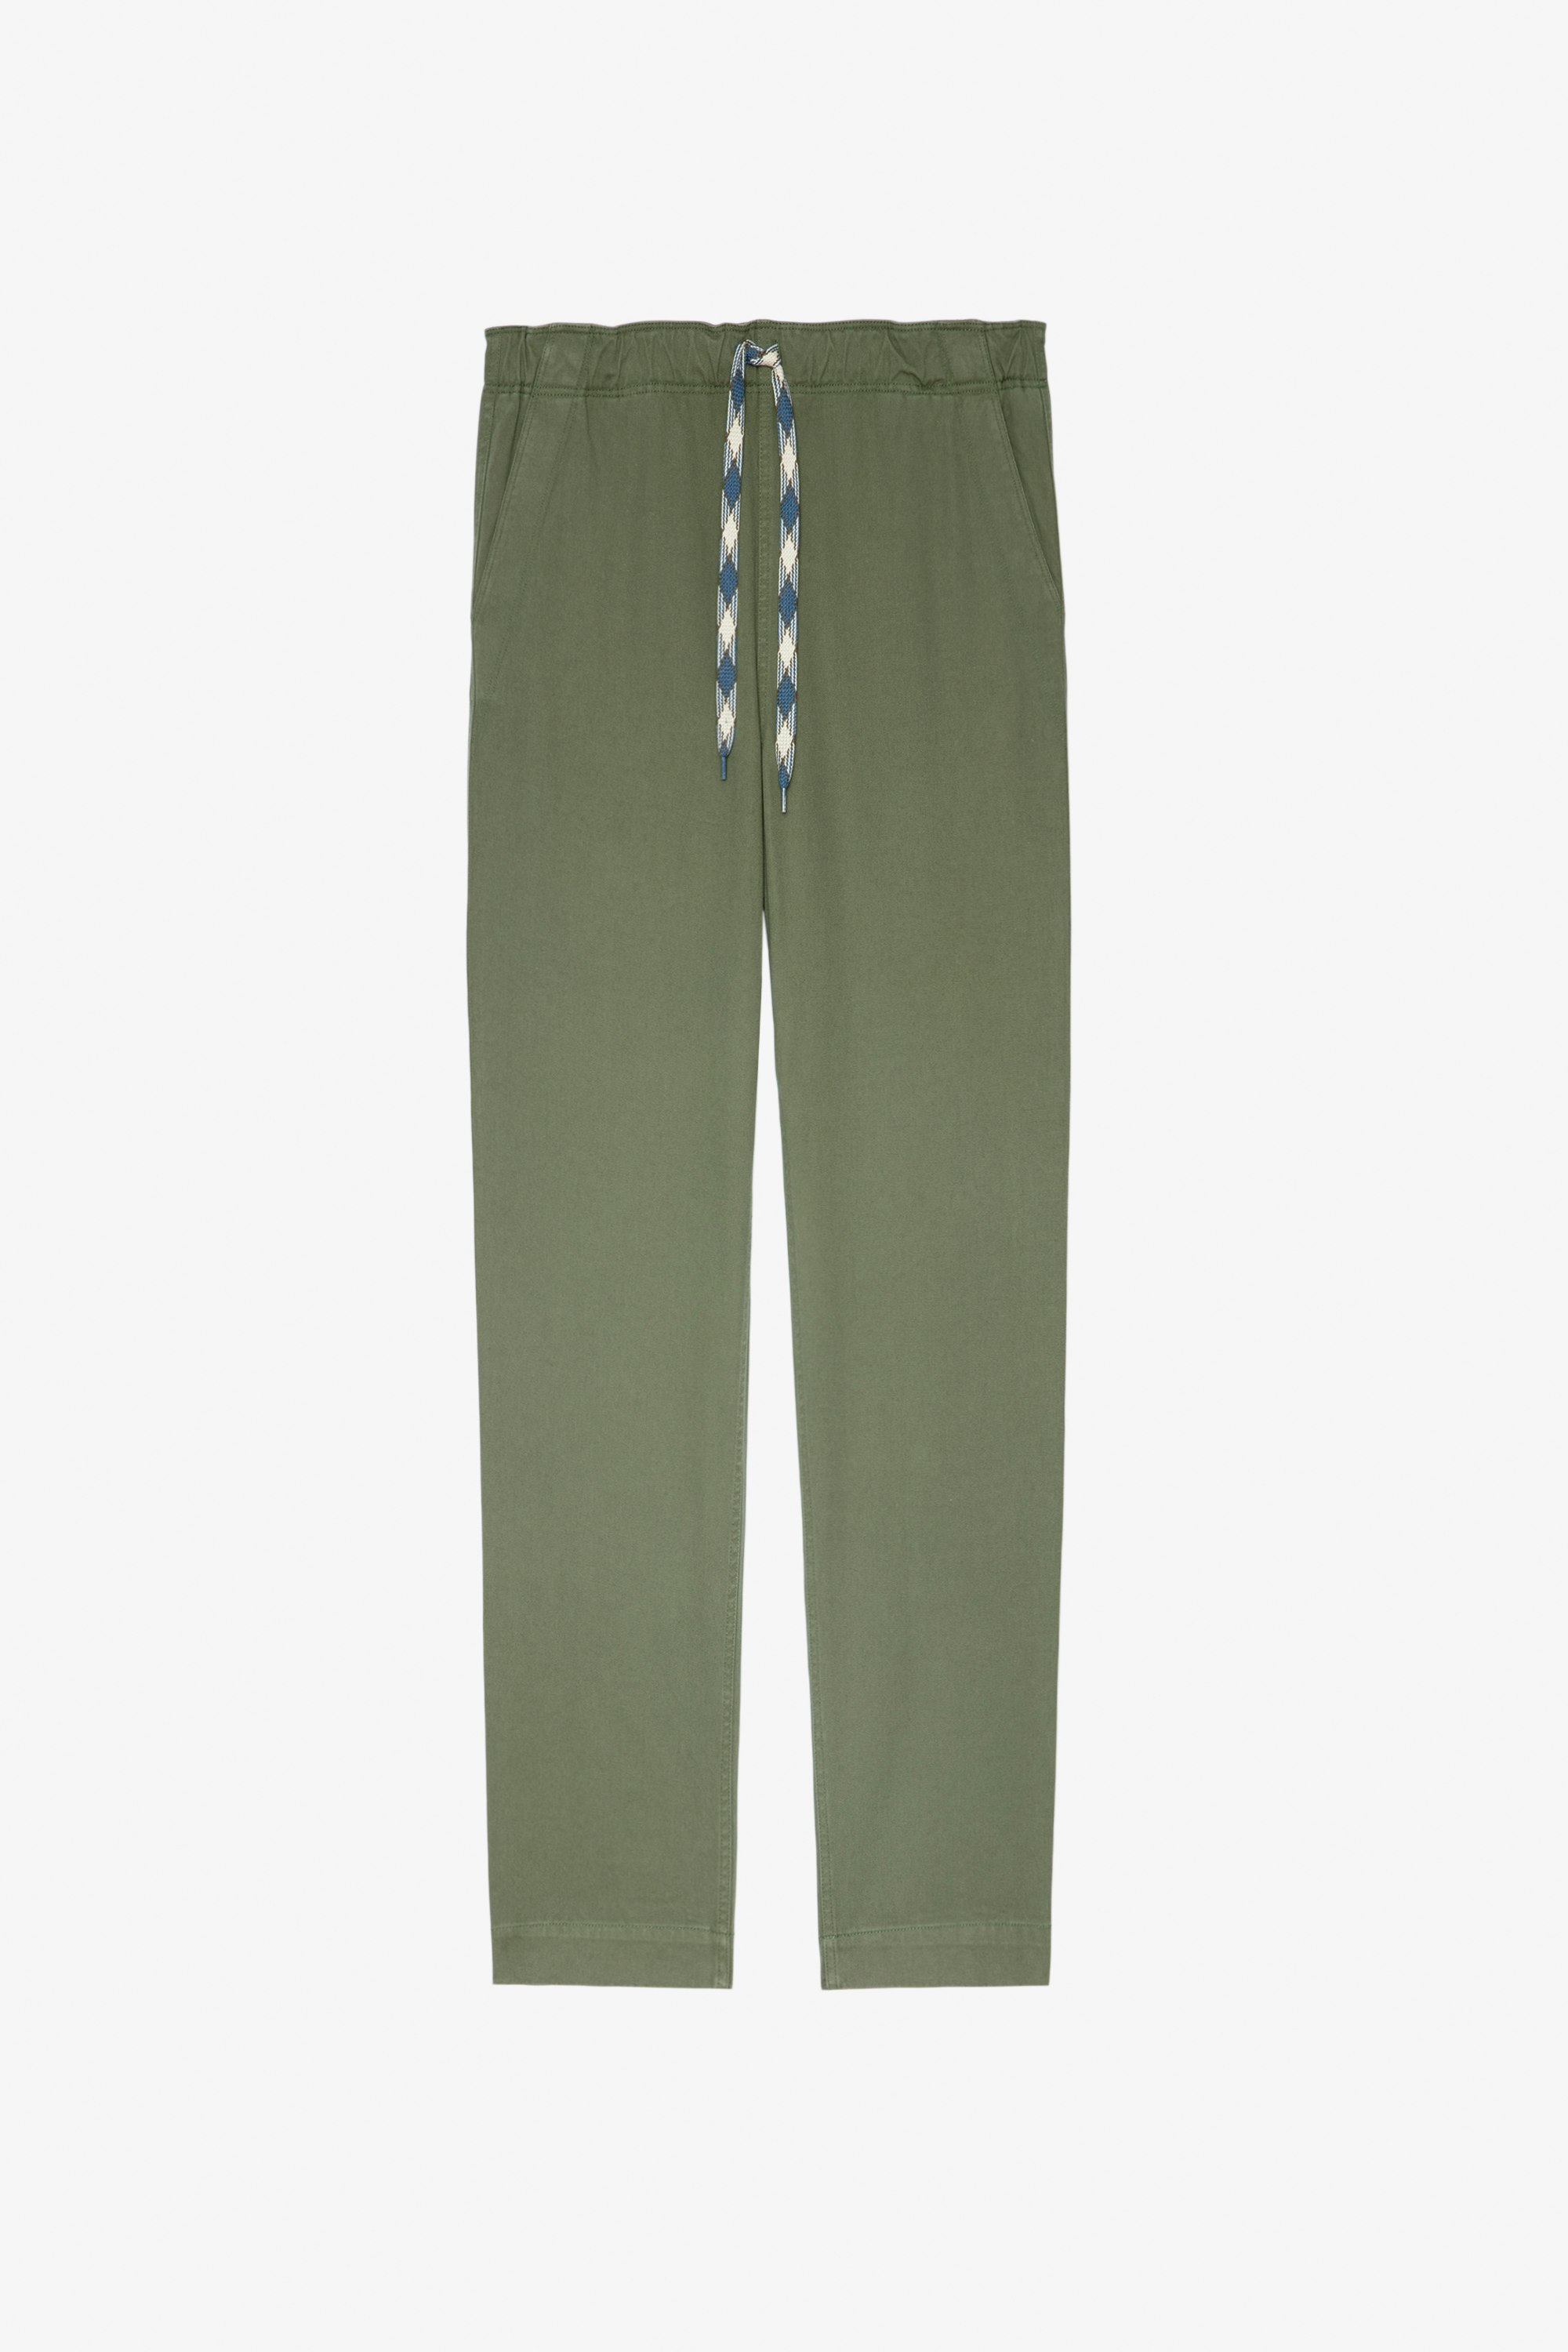 Linen Pixel Trousers Men's cotton-linen military trousers in khaki with a contrasting drawstring